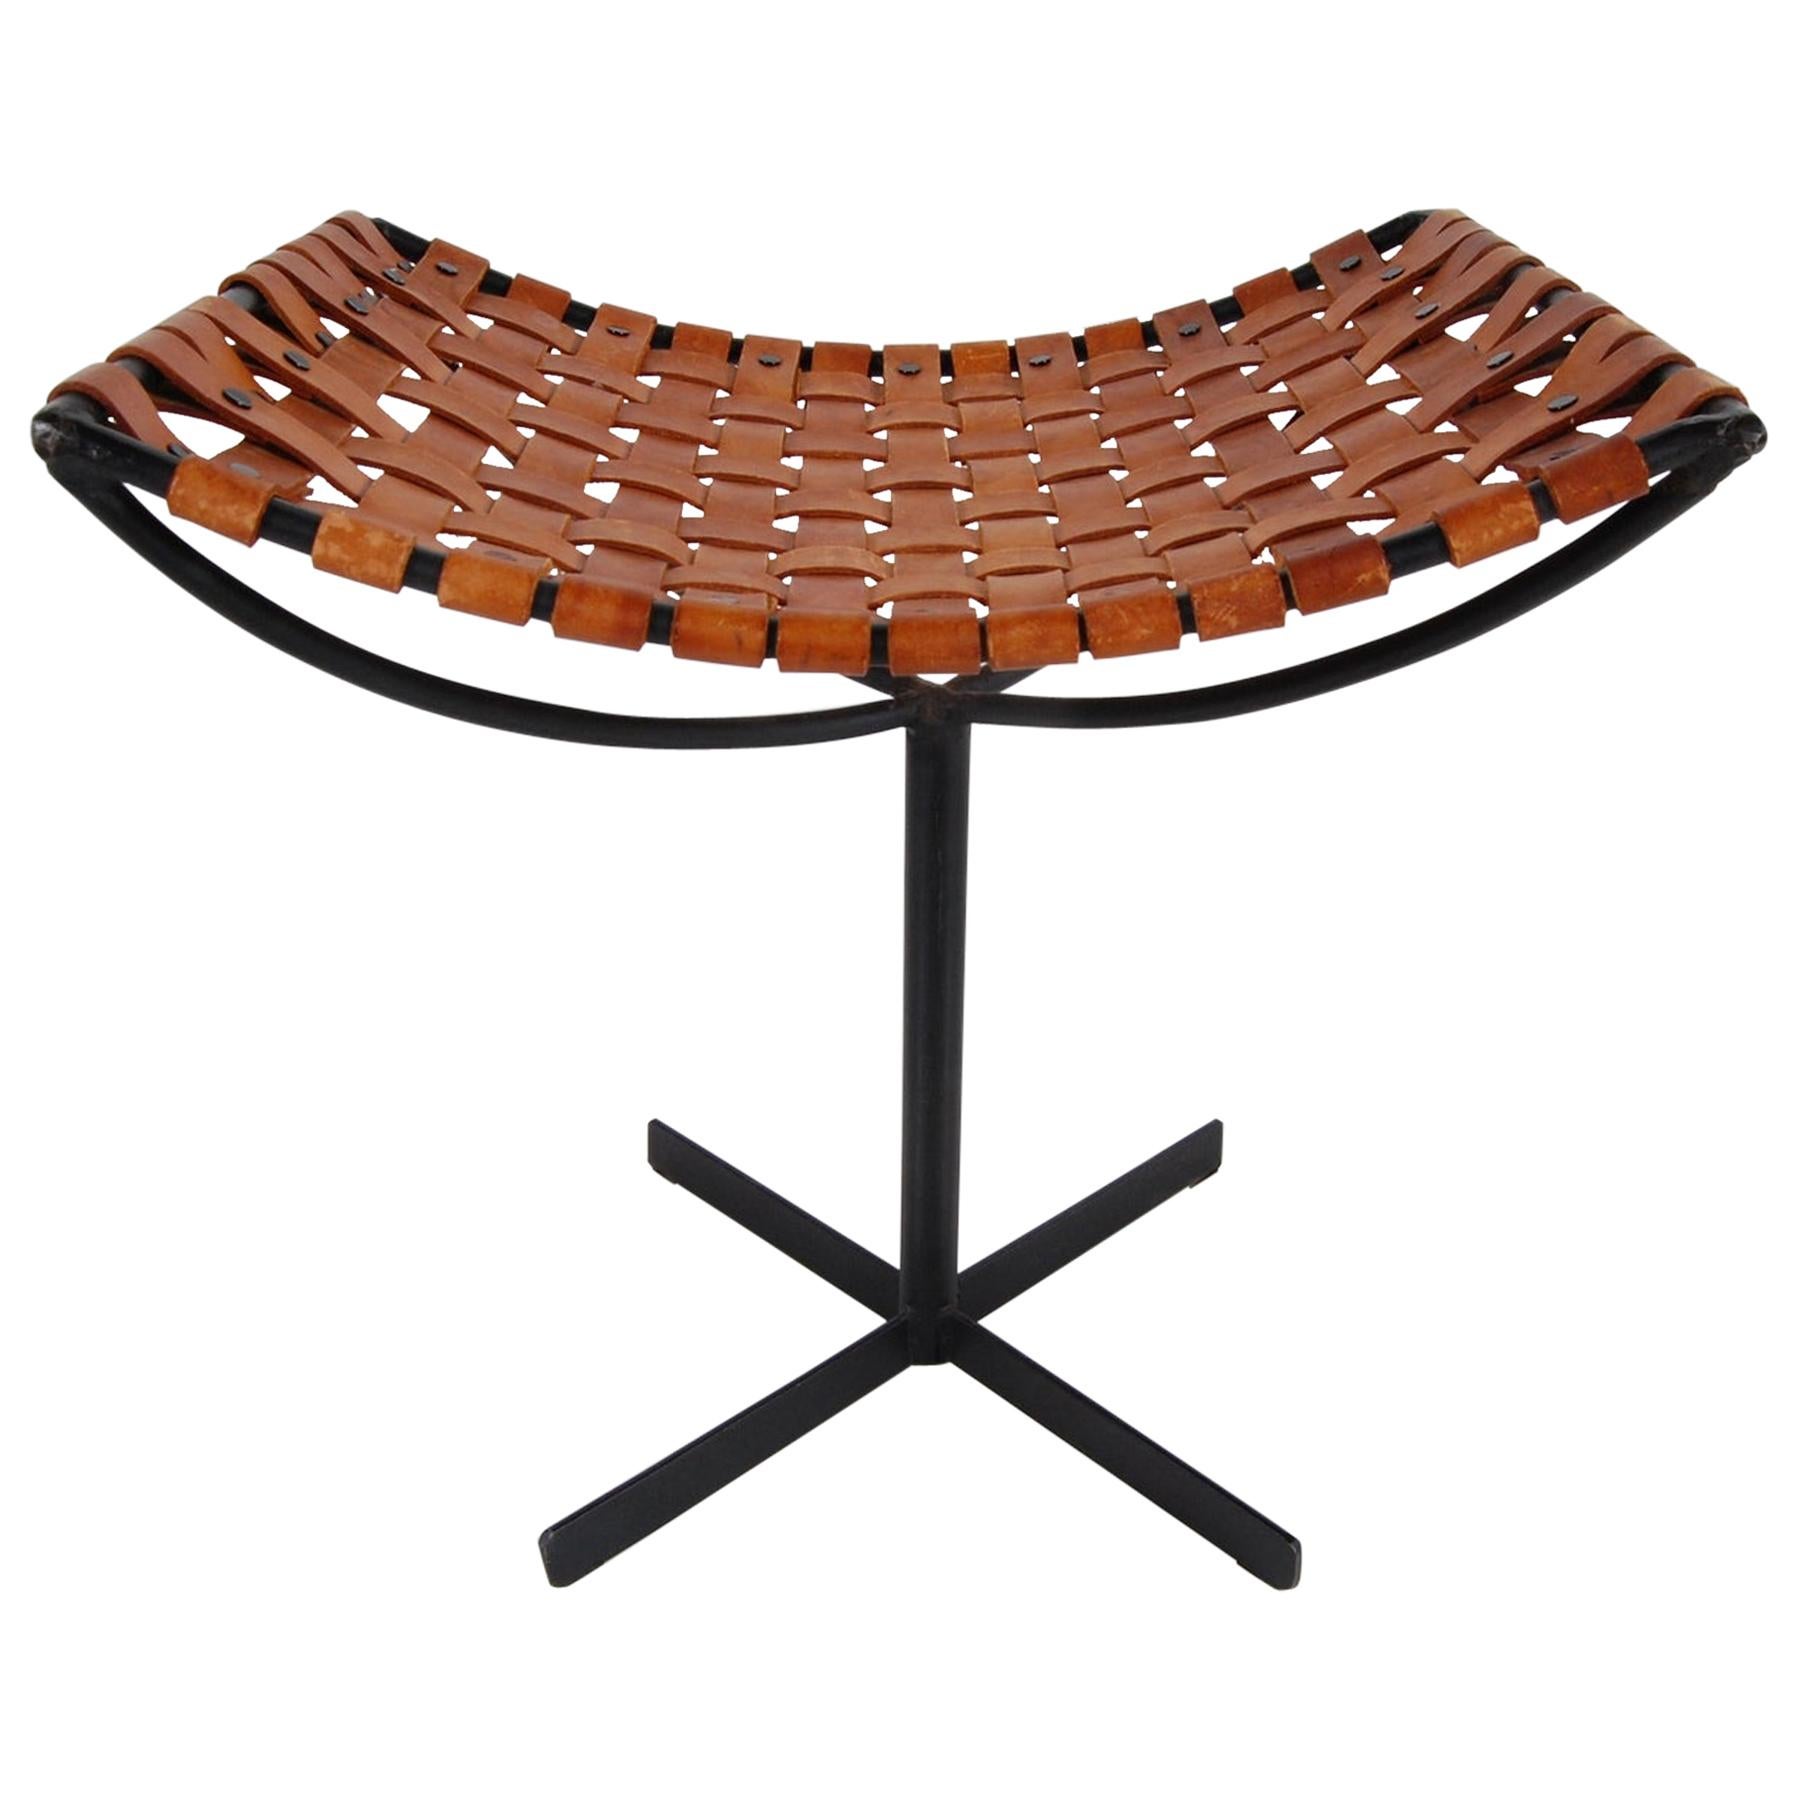 Woven Leather and Iron Stool by Max Gottschalk